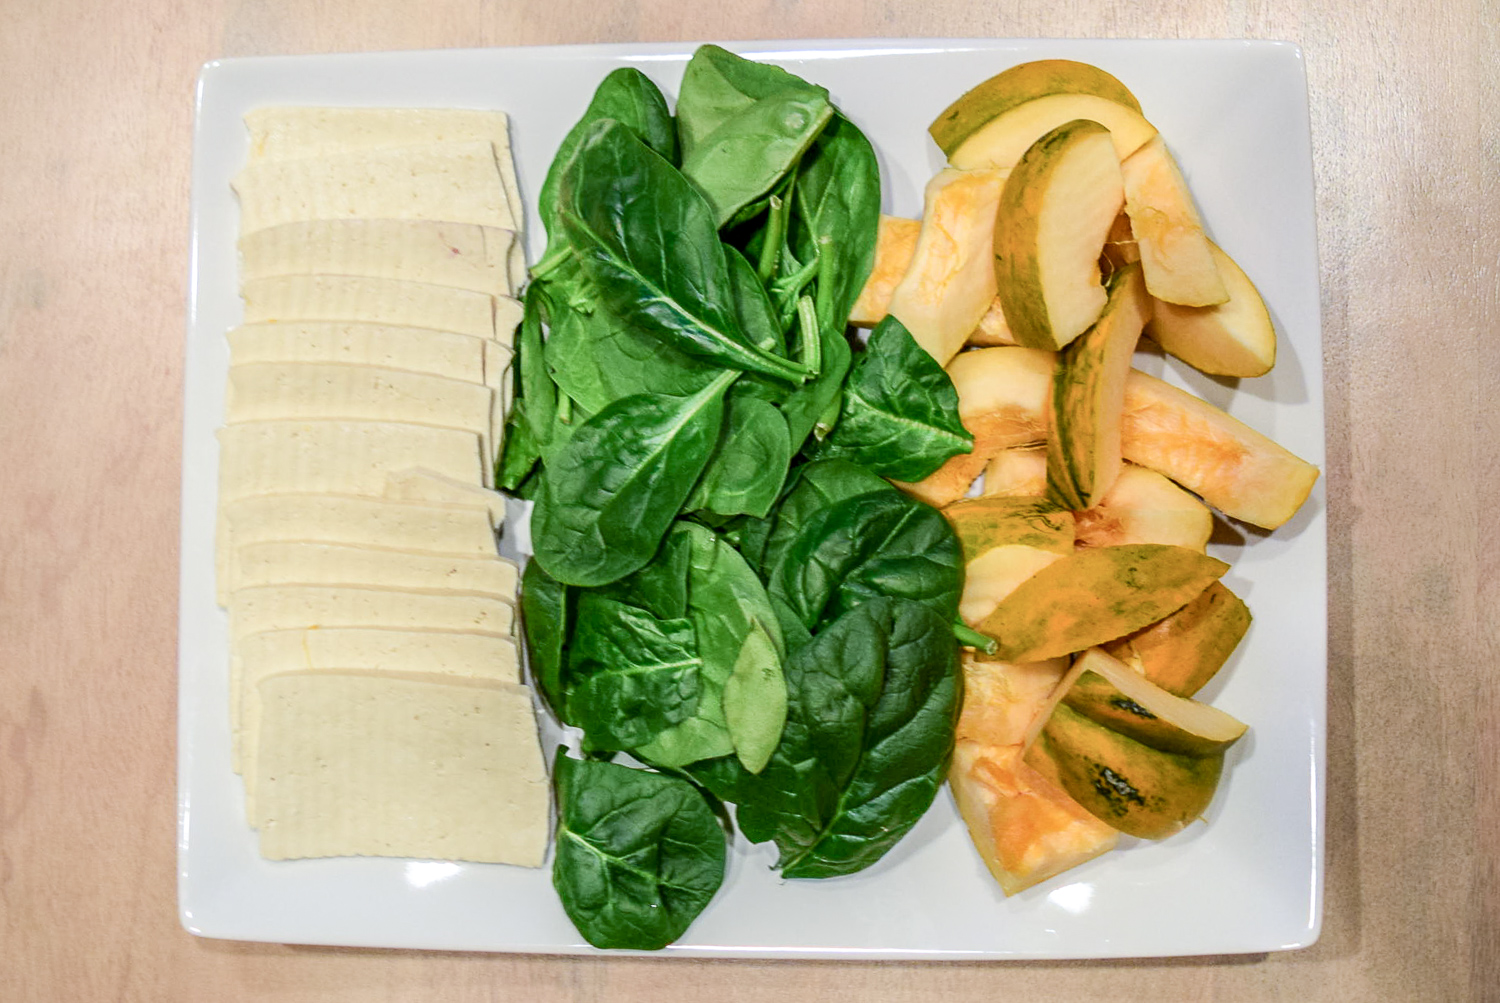 Tofu, spinach, and acorn squash on plate for Instant Pot Hot Pot